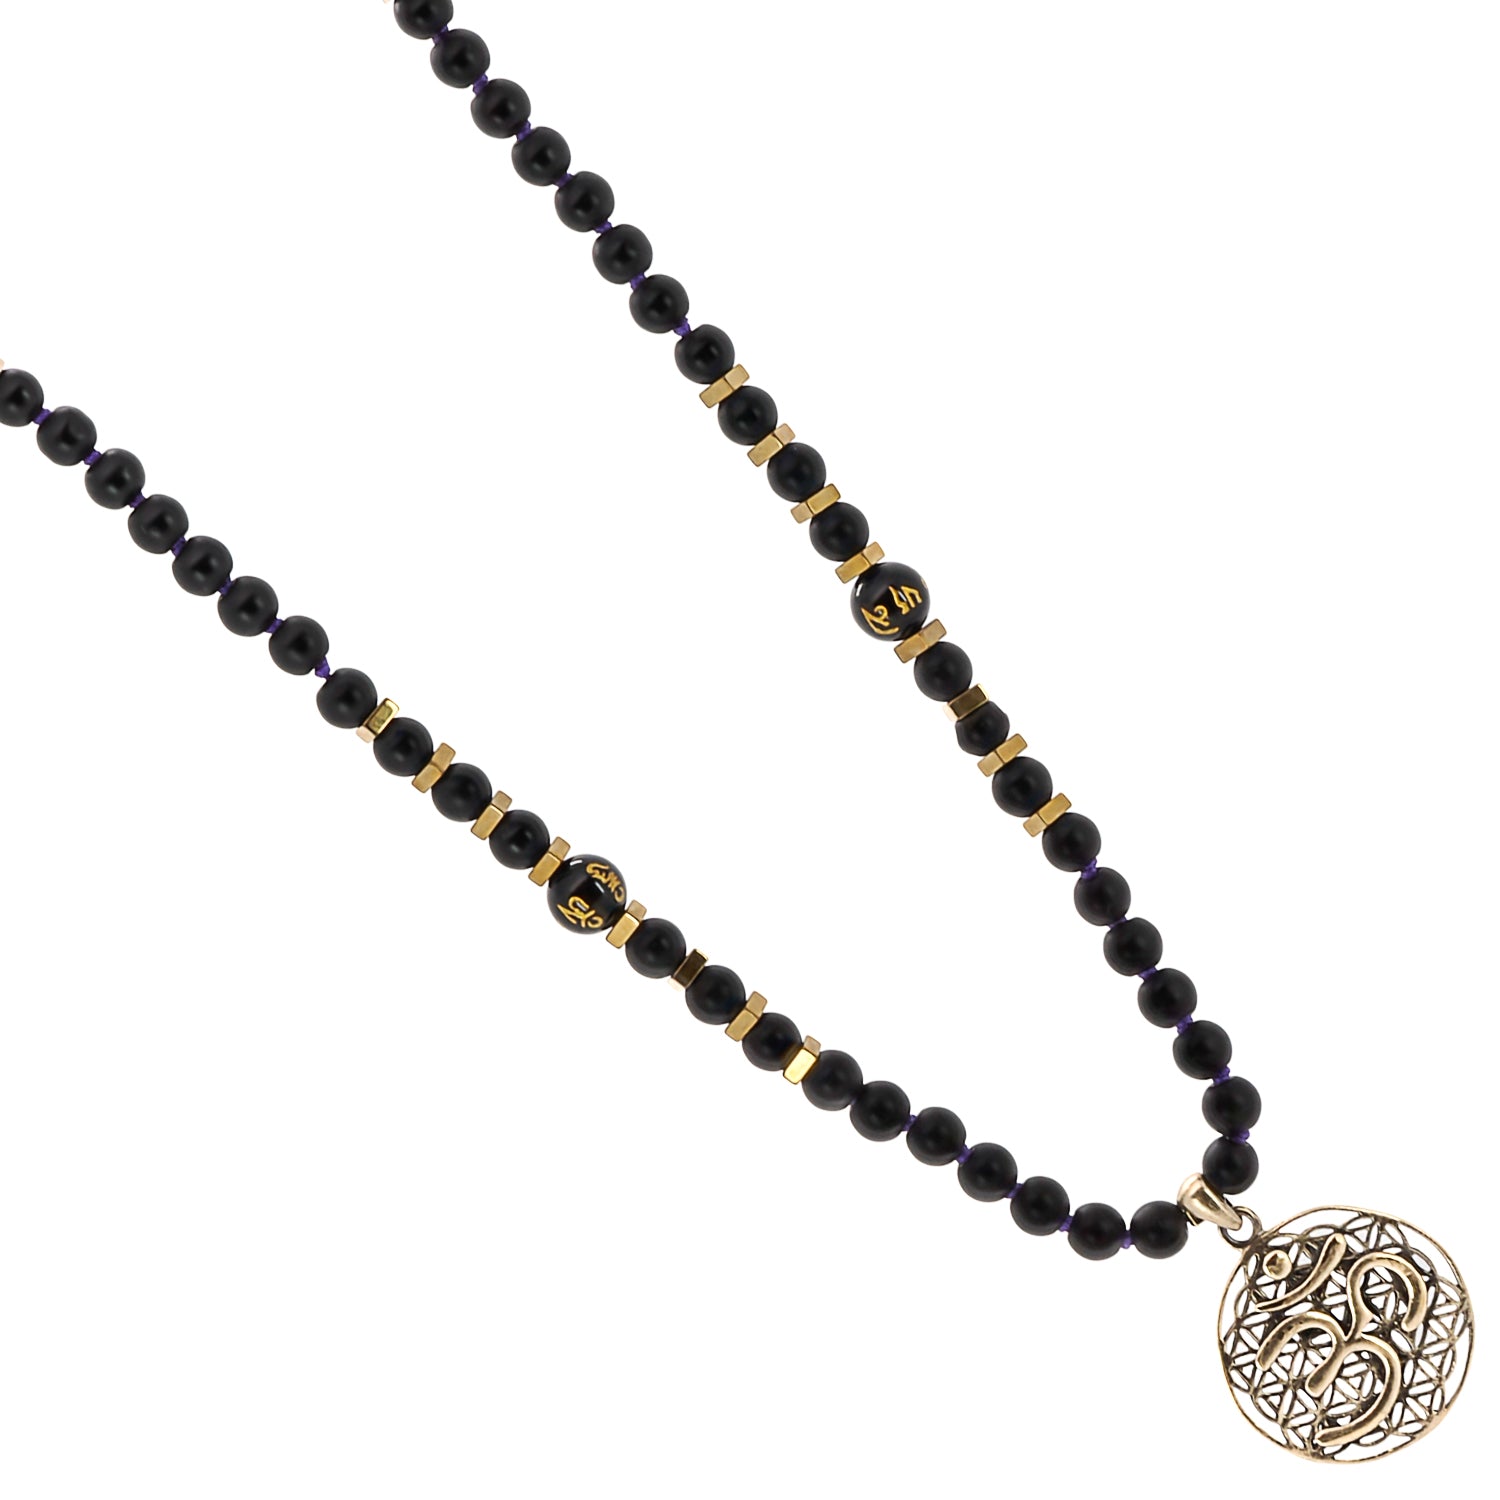 The meaningful symbols of spiritual growth and enlightenment in the Spiritual Yoga Mala Onyx Necklace